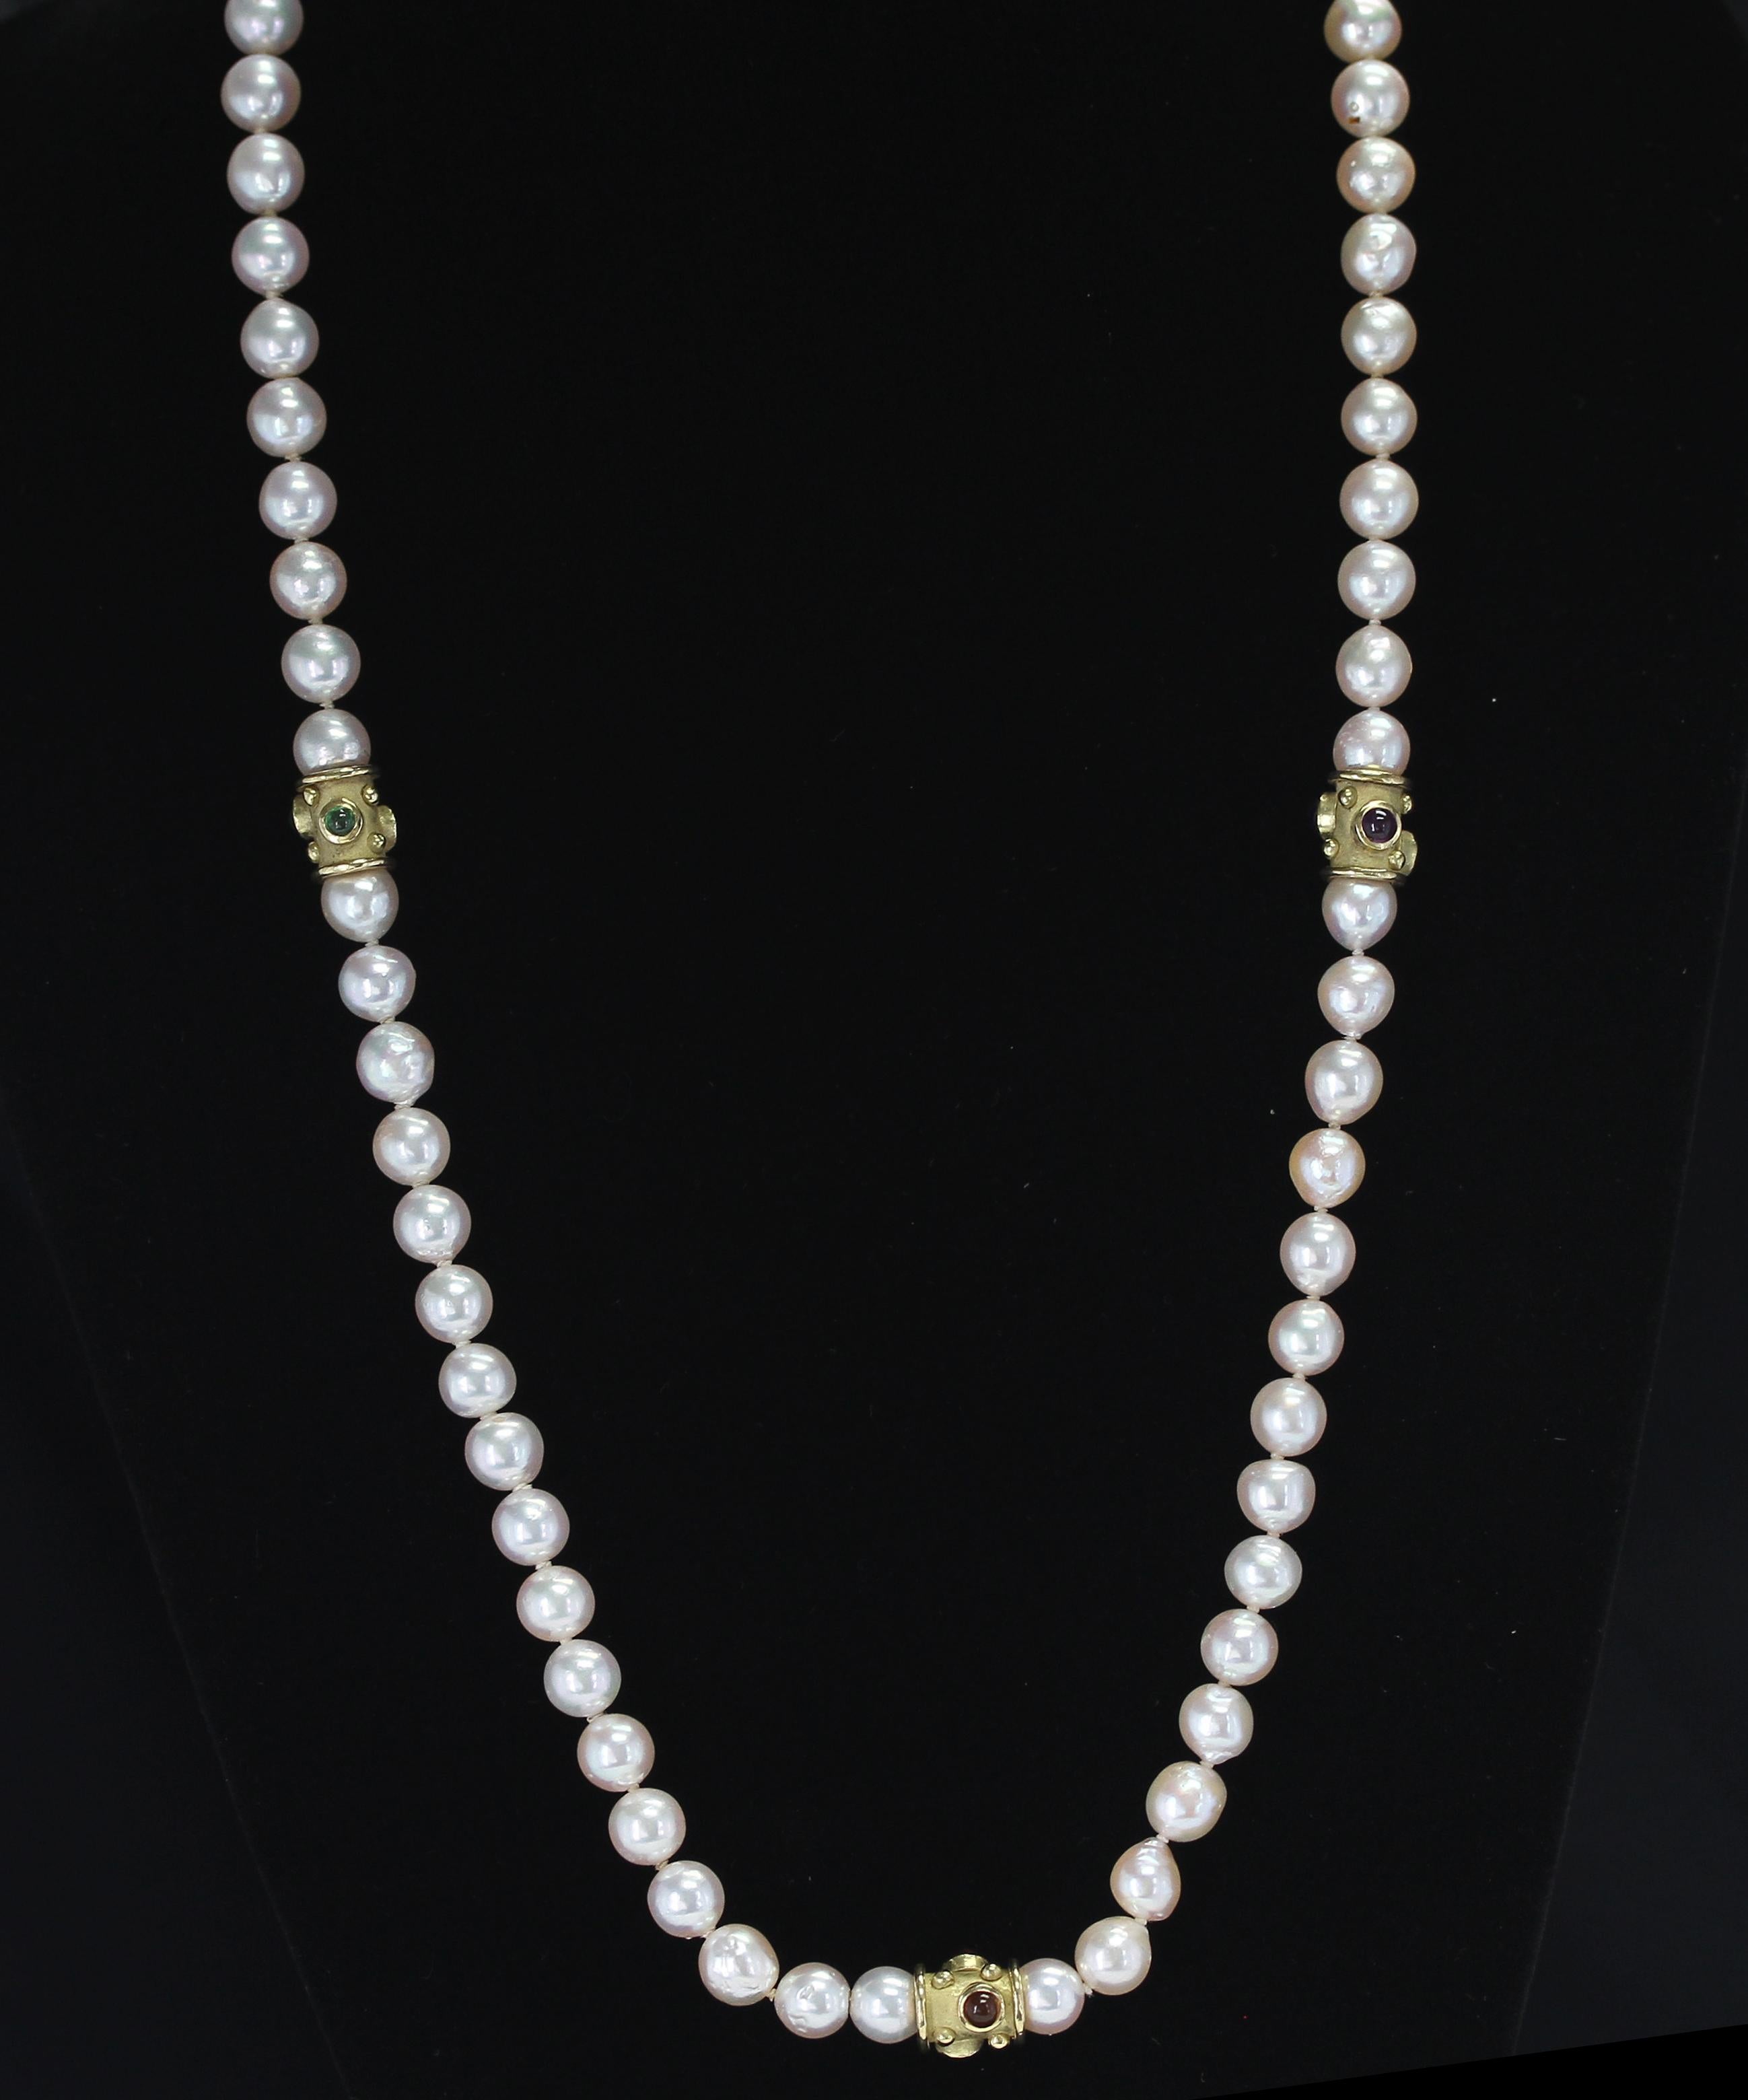 Bead Pearl Necklace with Gold and Peridot, Citrine, and Amethyst Cabochons For Sale